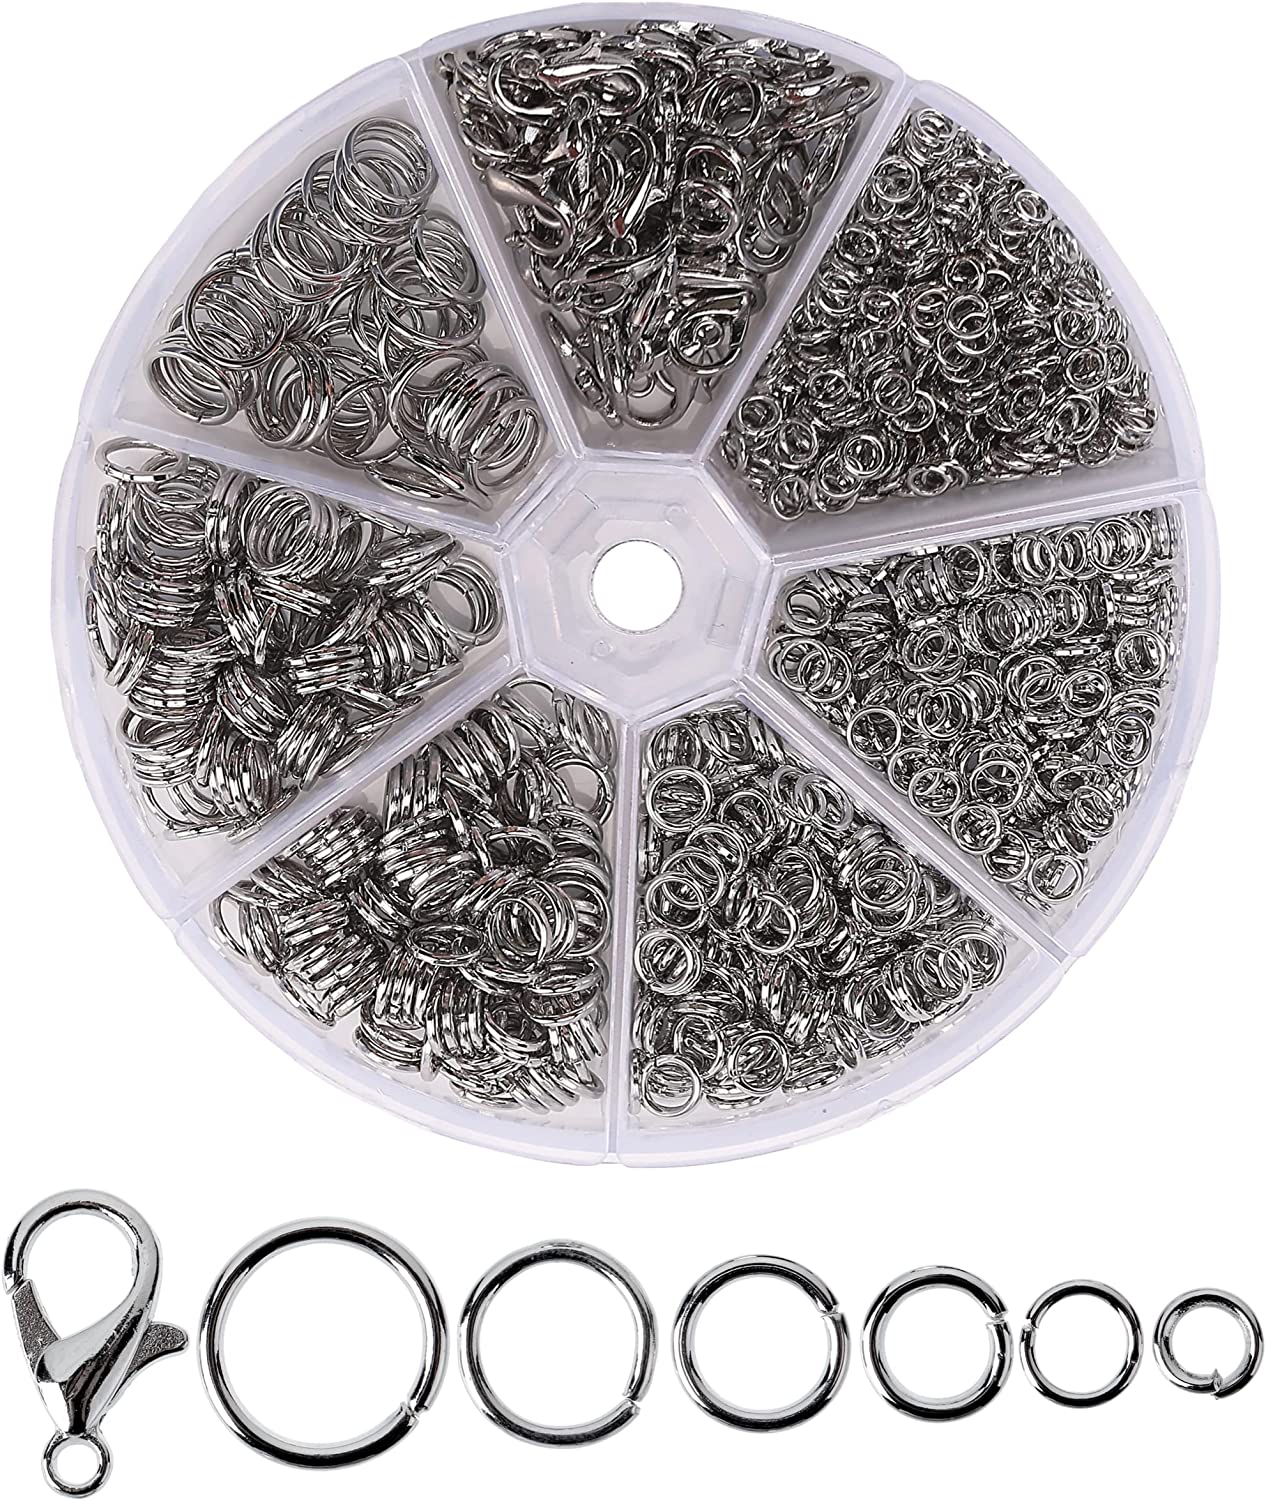 Open Jump Rings, Silver, 1014 pcs, 6 Sizes Open Jump Rings for